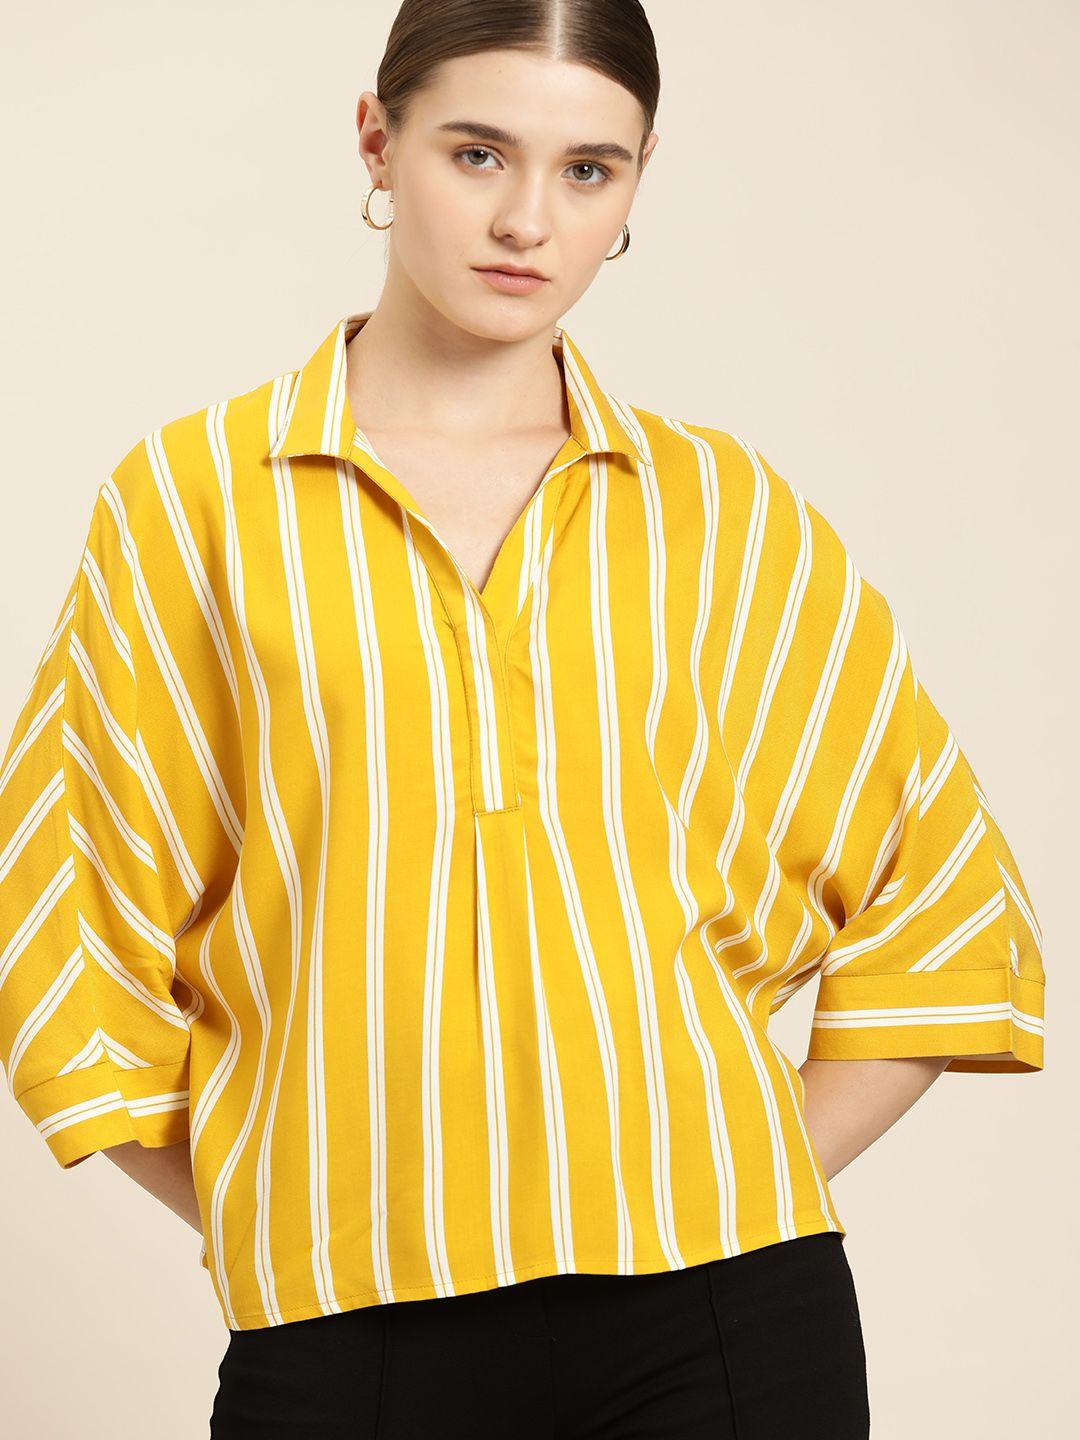 her by invictus striped extended sleeves shirt style top